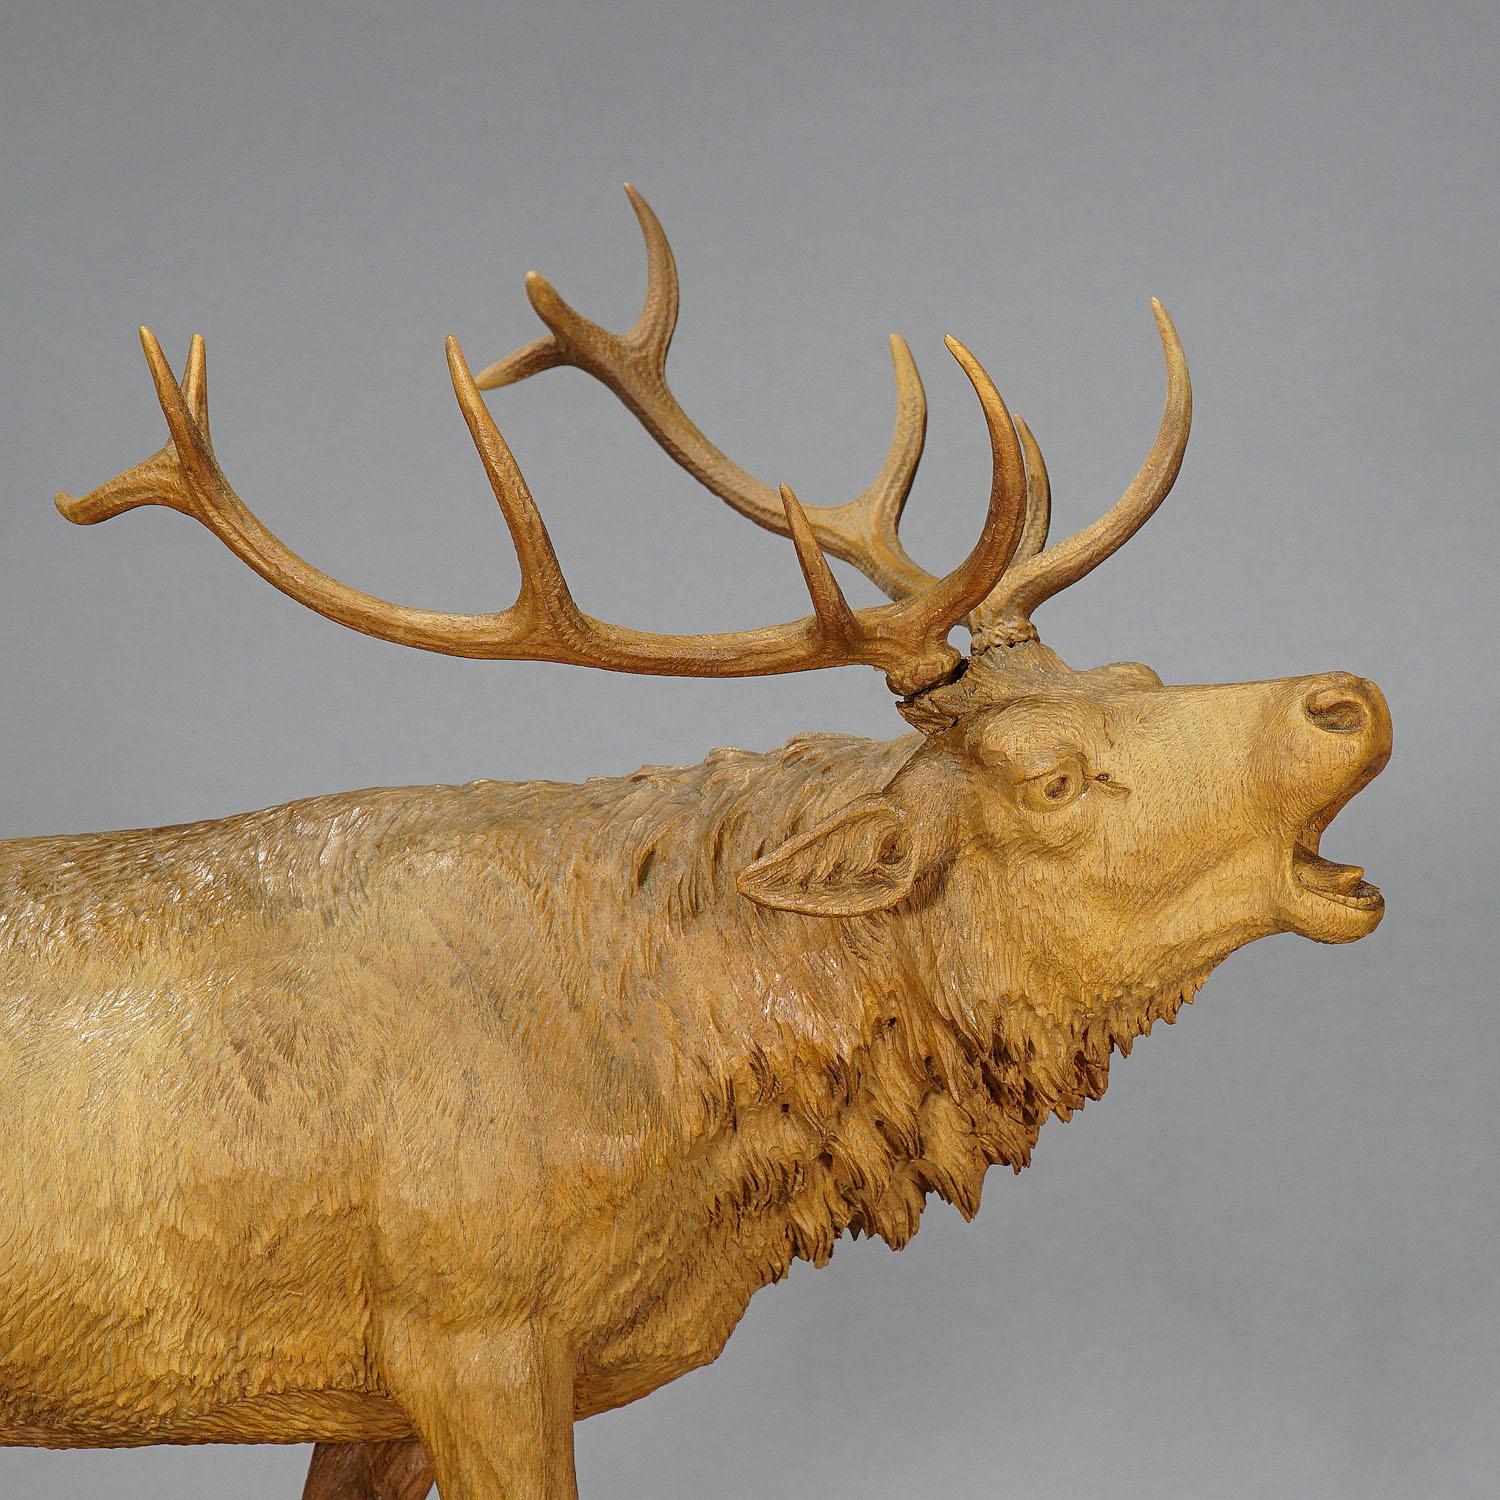 An antique early 20th century wooden carved sculpture of a belling stag. Handcarved in lindenwood with naturalistic details - most probably in Austria around 1920. This large black forest style carved sculpture would be a stunning addition to any